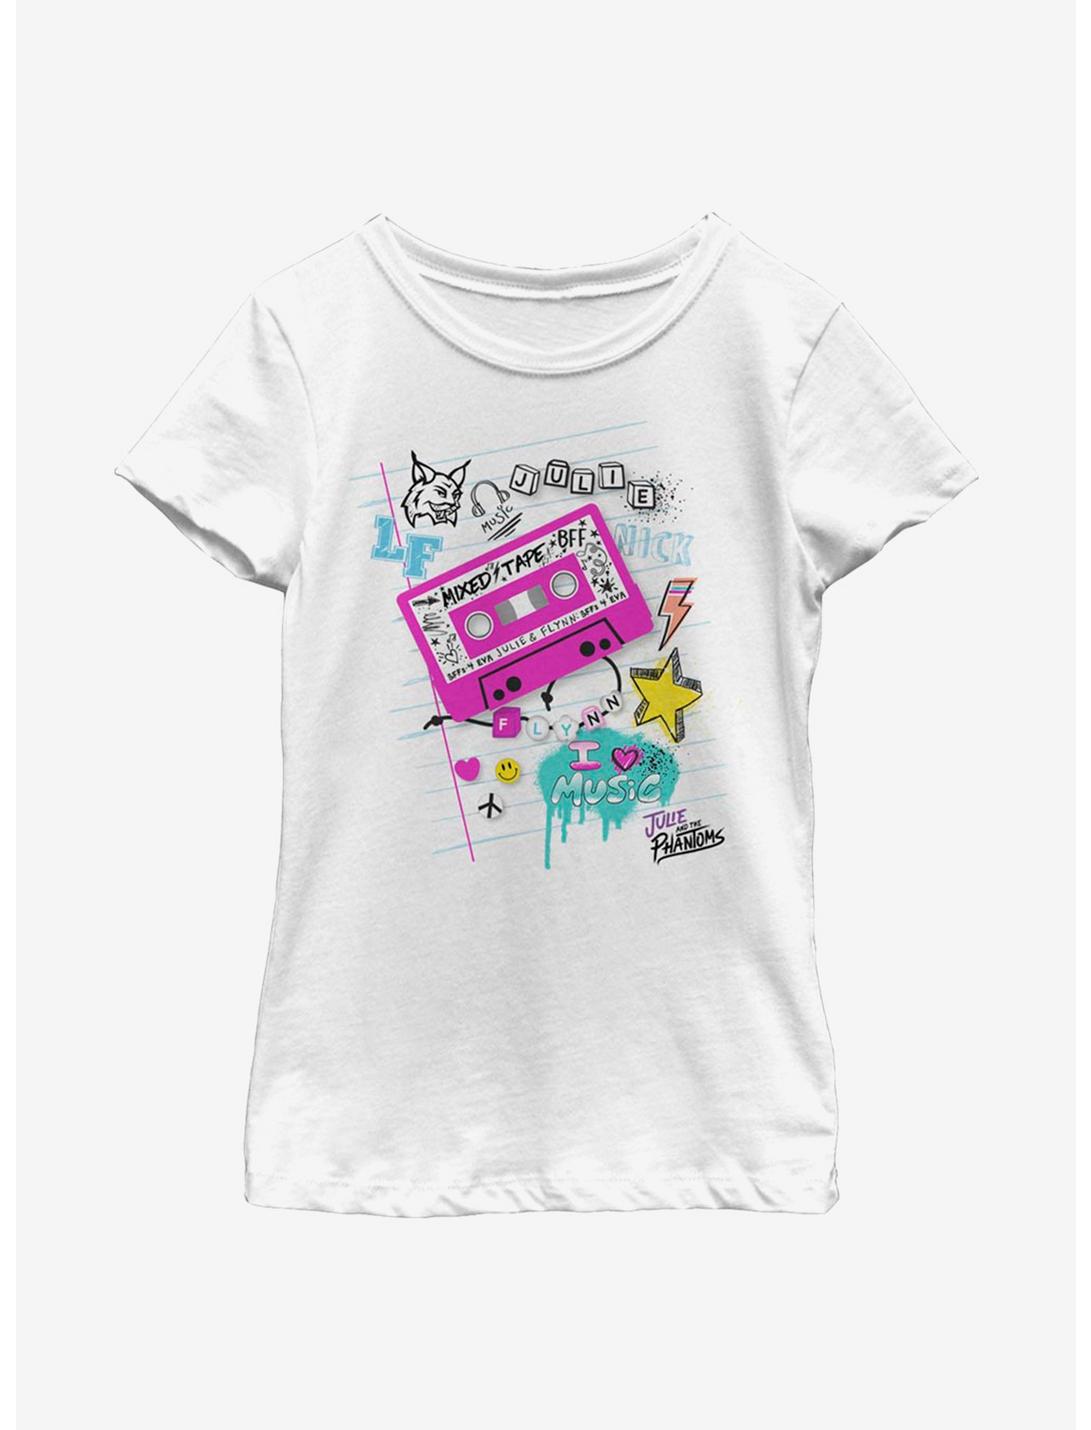 Julie And The Phantoms School Page Youth Girls T-Shirt, WHITE, hi-res